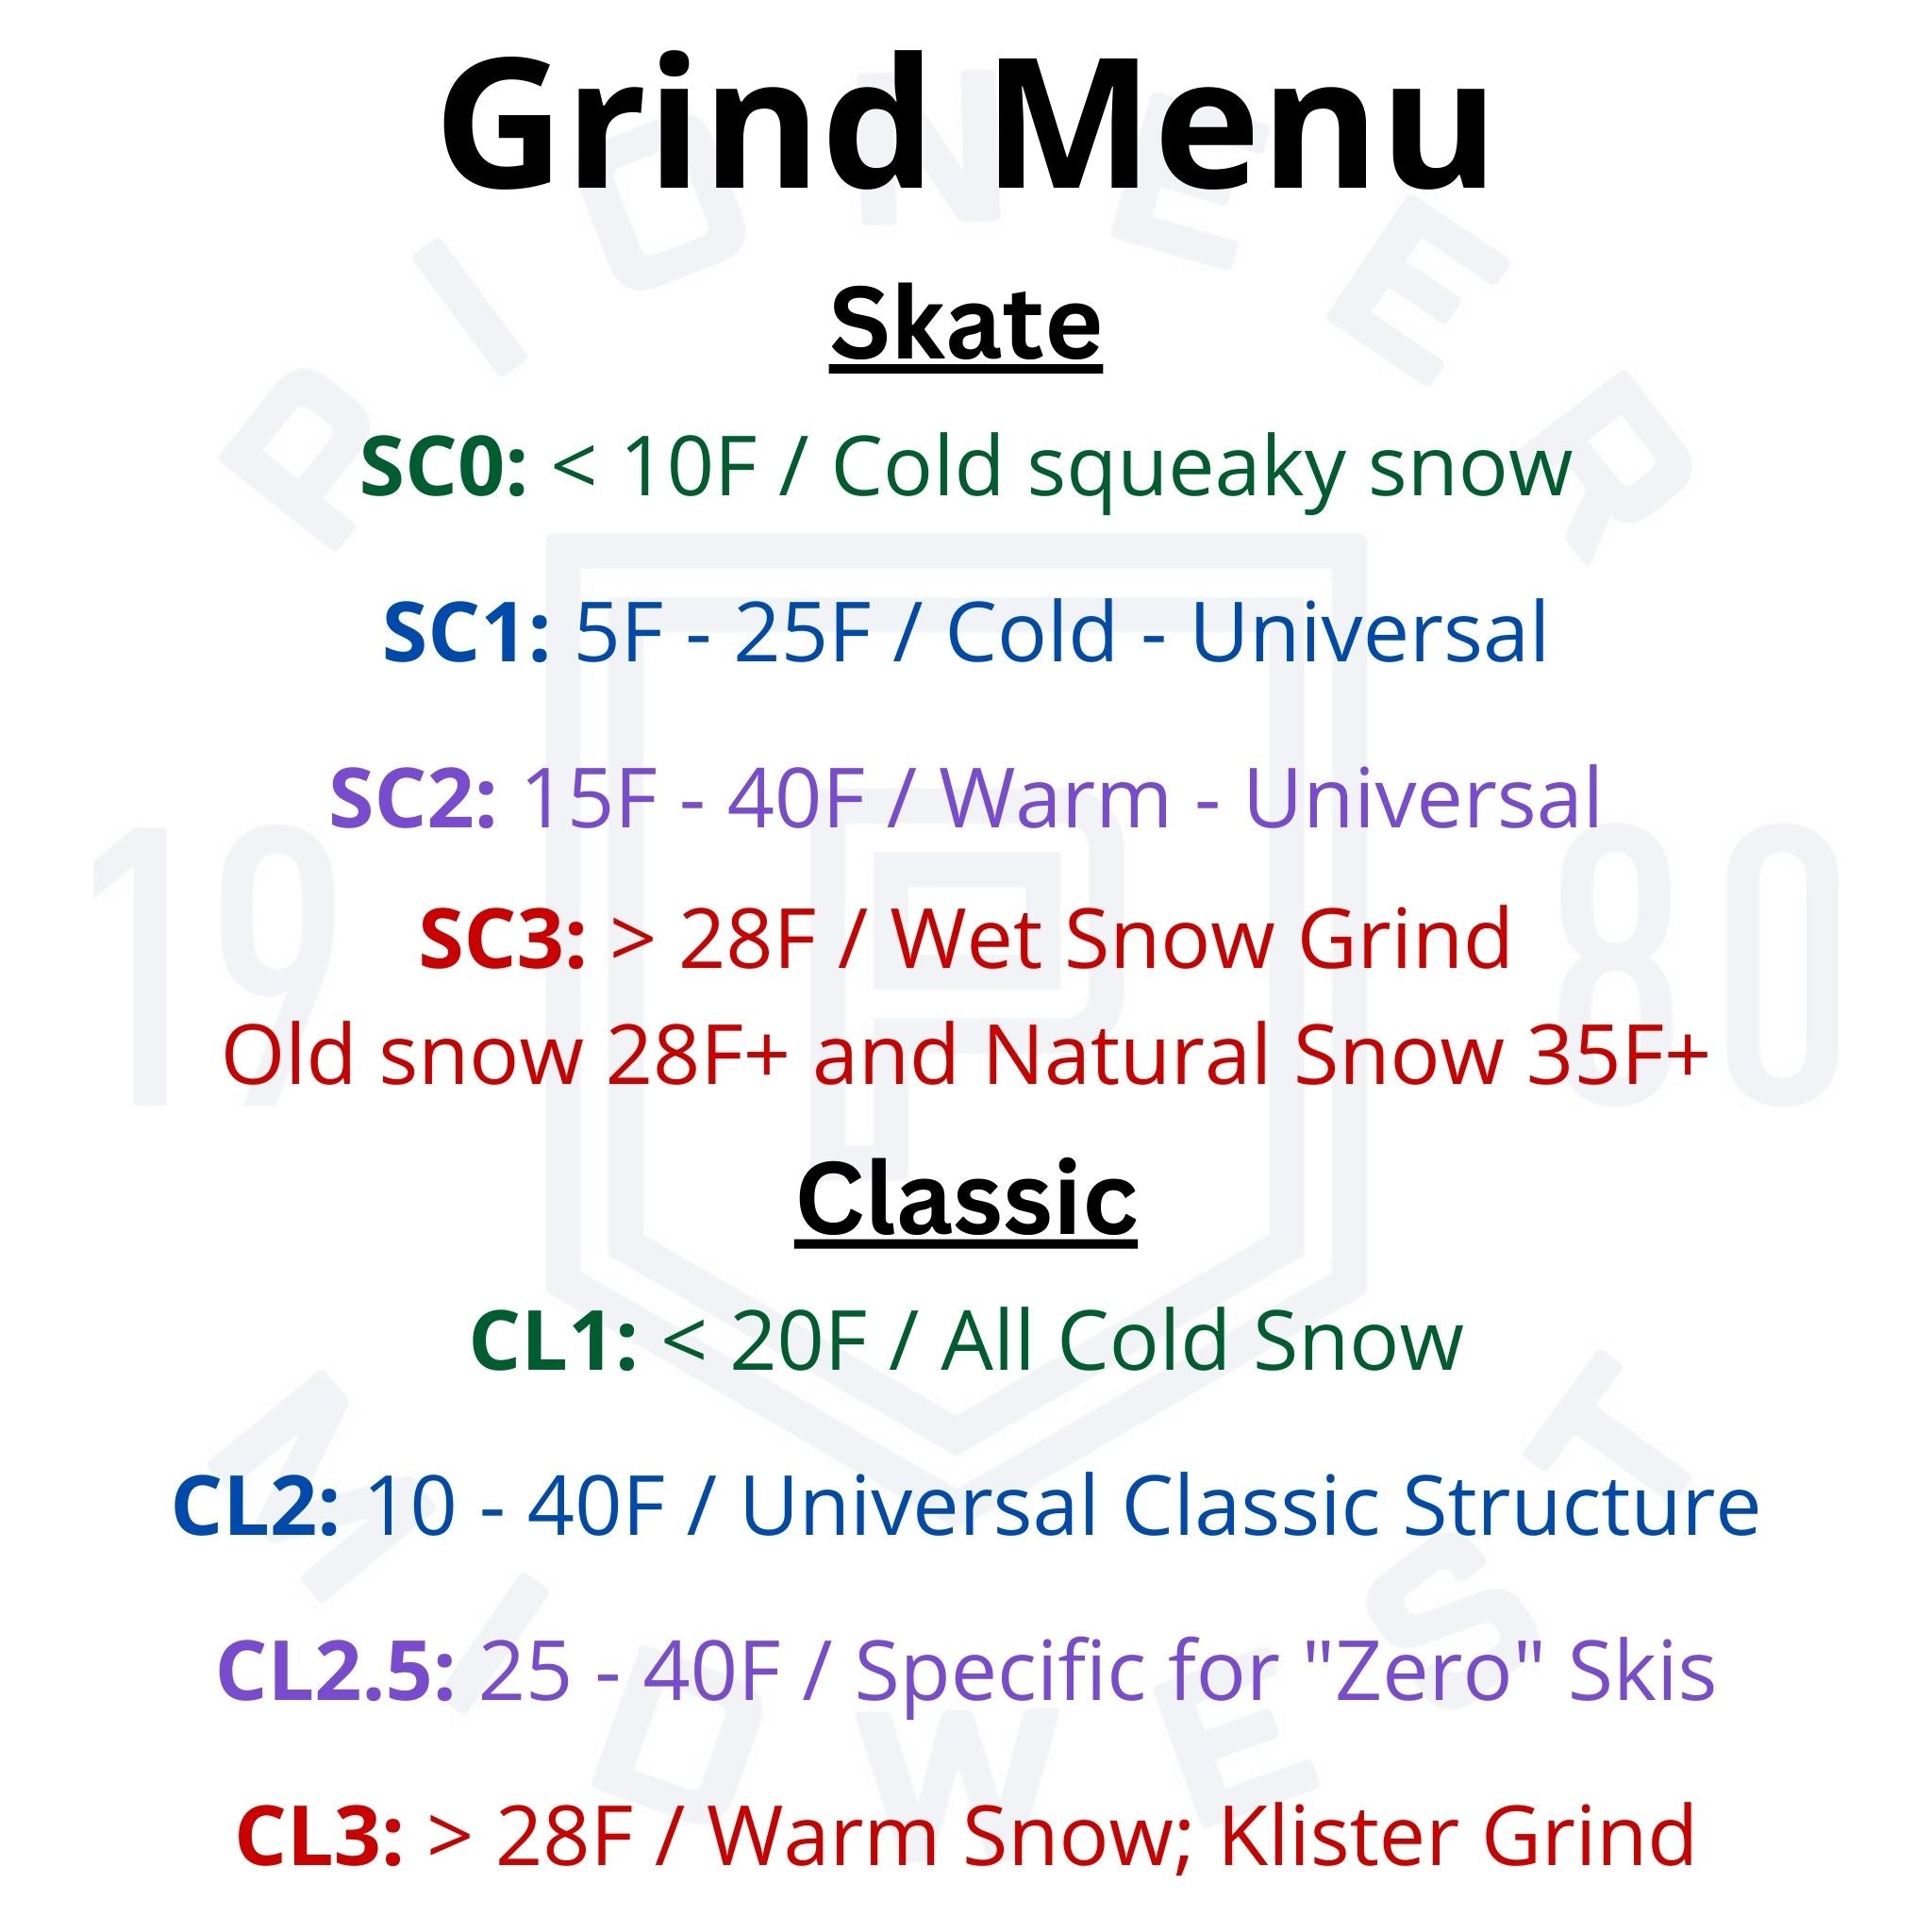 Stonegrind New Skis (Includes Hot Box and Base Harden)